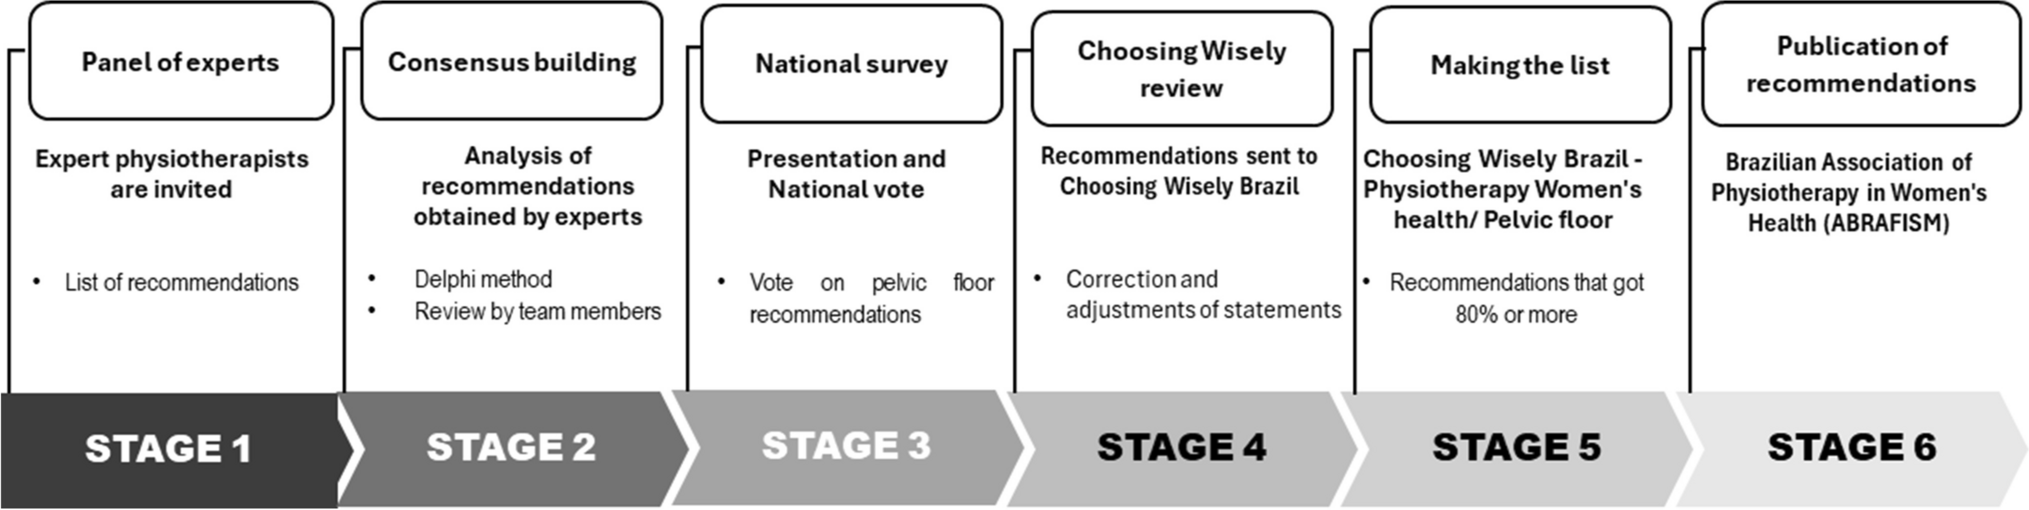 Low-Value Practices for Pelvic Floor Dysfunction—Choosing Wisely Recommendations from the Brazilian Association of Physiotherapy in Women’s Health: Observational Study